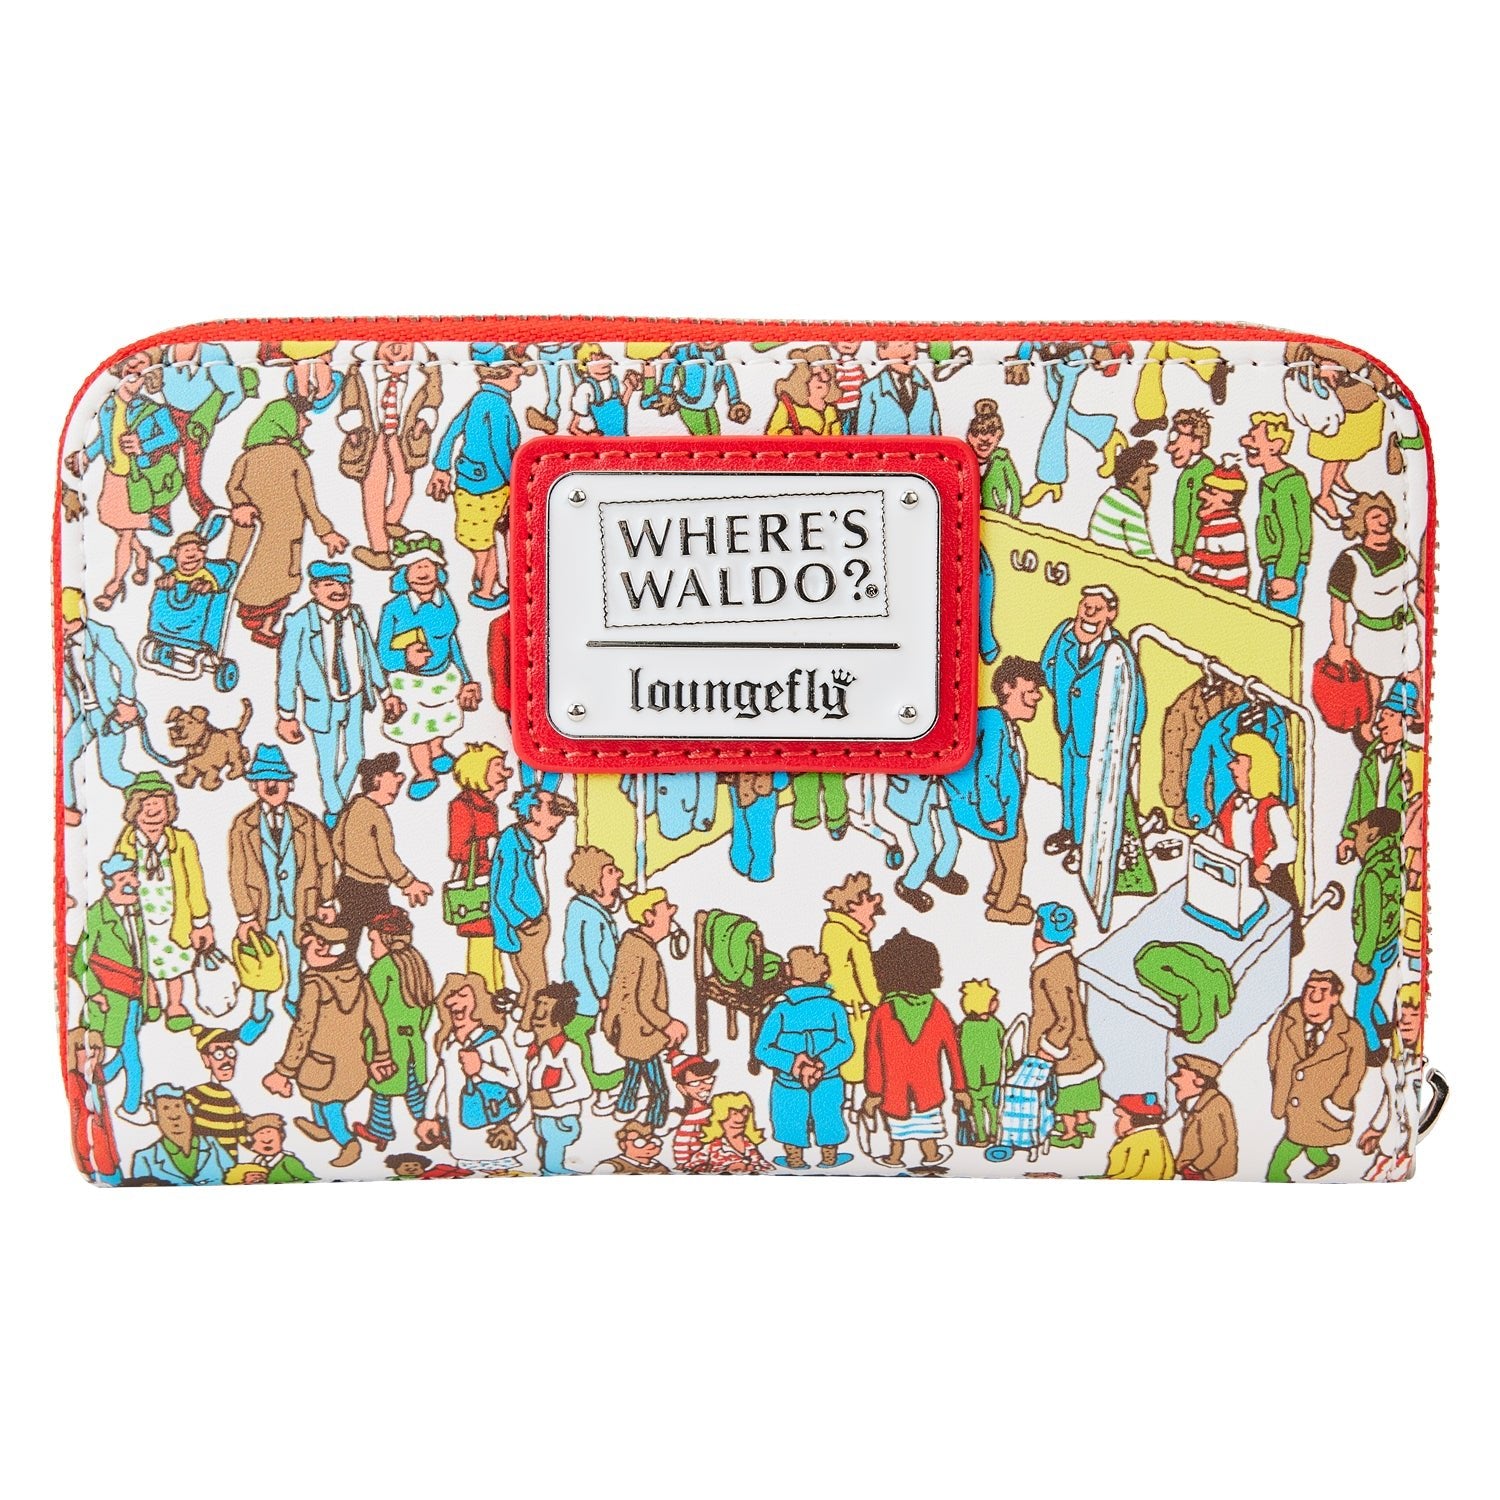 Loungefly x Where's Wally? (Waldo) All Over Print Purse - GeekCore